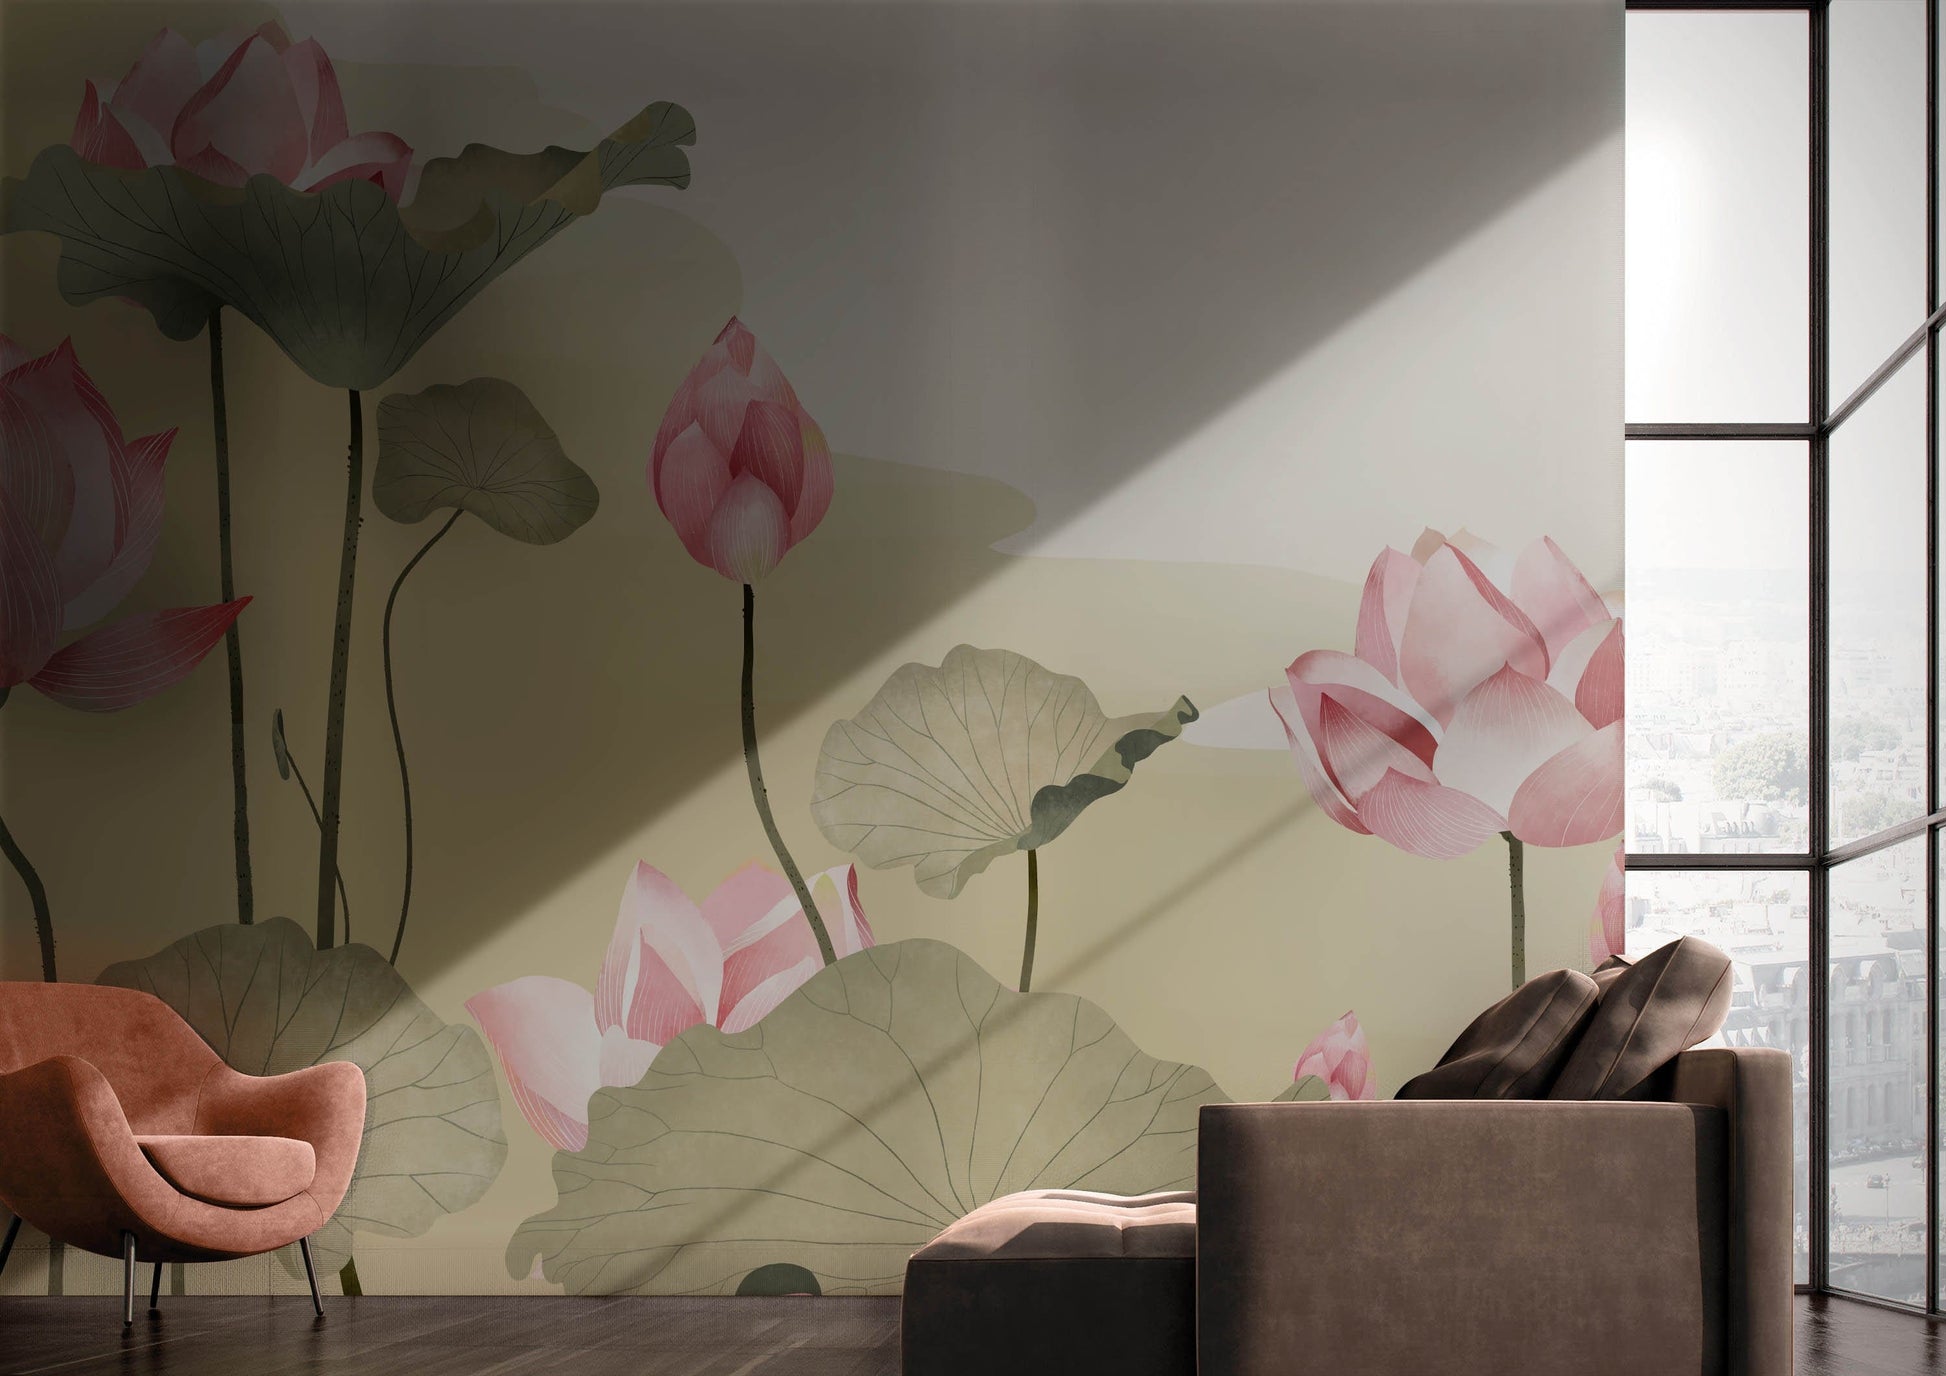 Living Room Decoration Featuring a Lotus Flower Wallpaper Mural